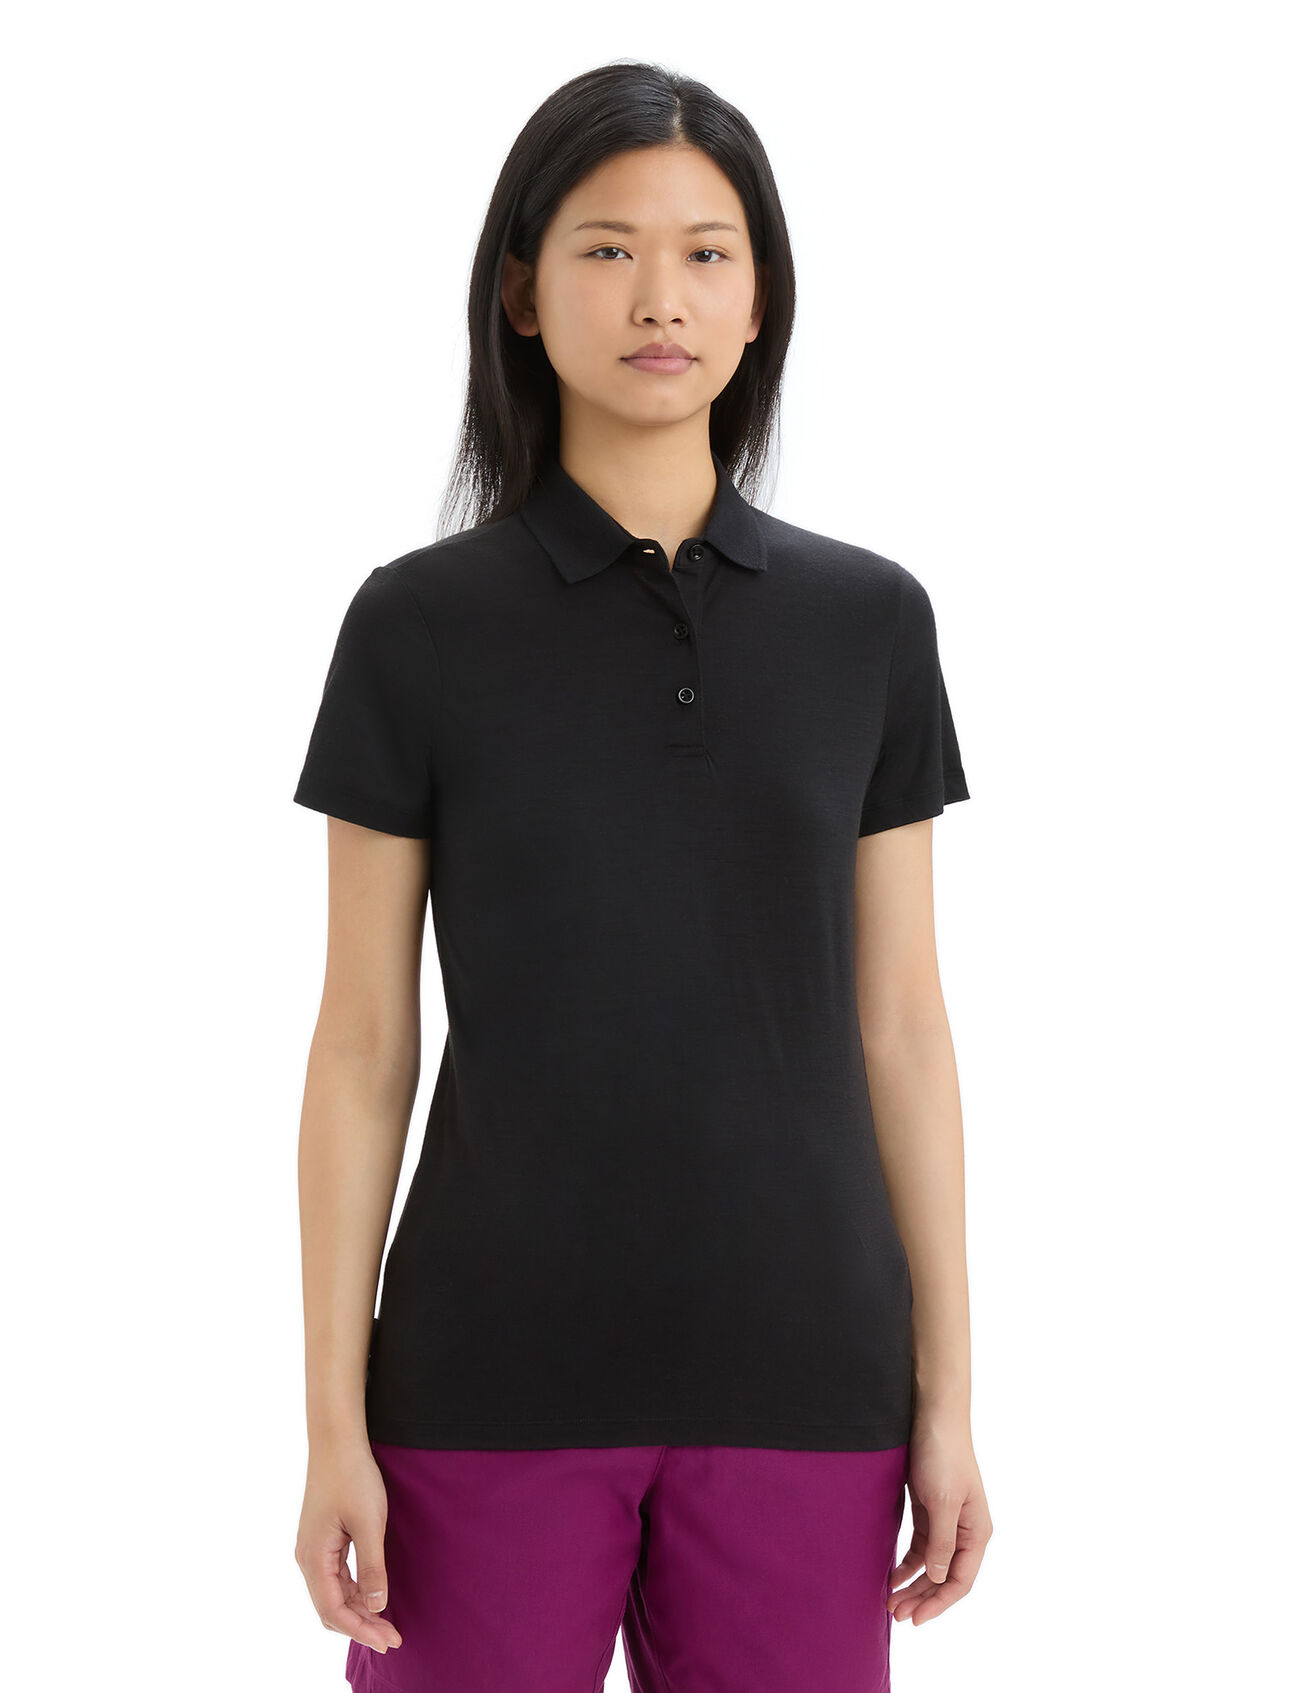 Womens Merino Tech Lite II Short Sleeve Polo  A classic lightweight polo shirt made with 100% merino wool jersey fabric, the Tech Lite II Short Sleeve Polo offers up everyday comfort, softness and breathability. 